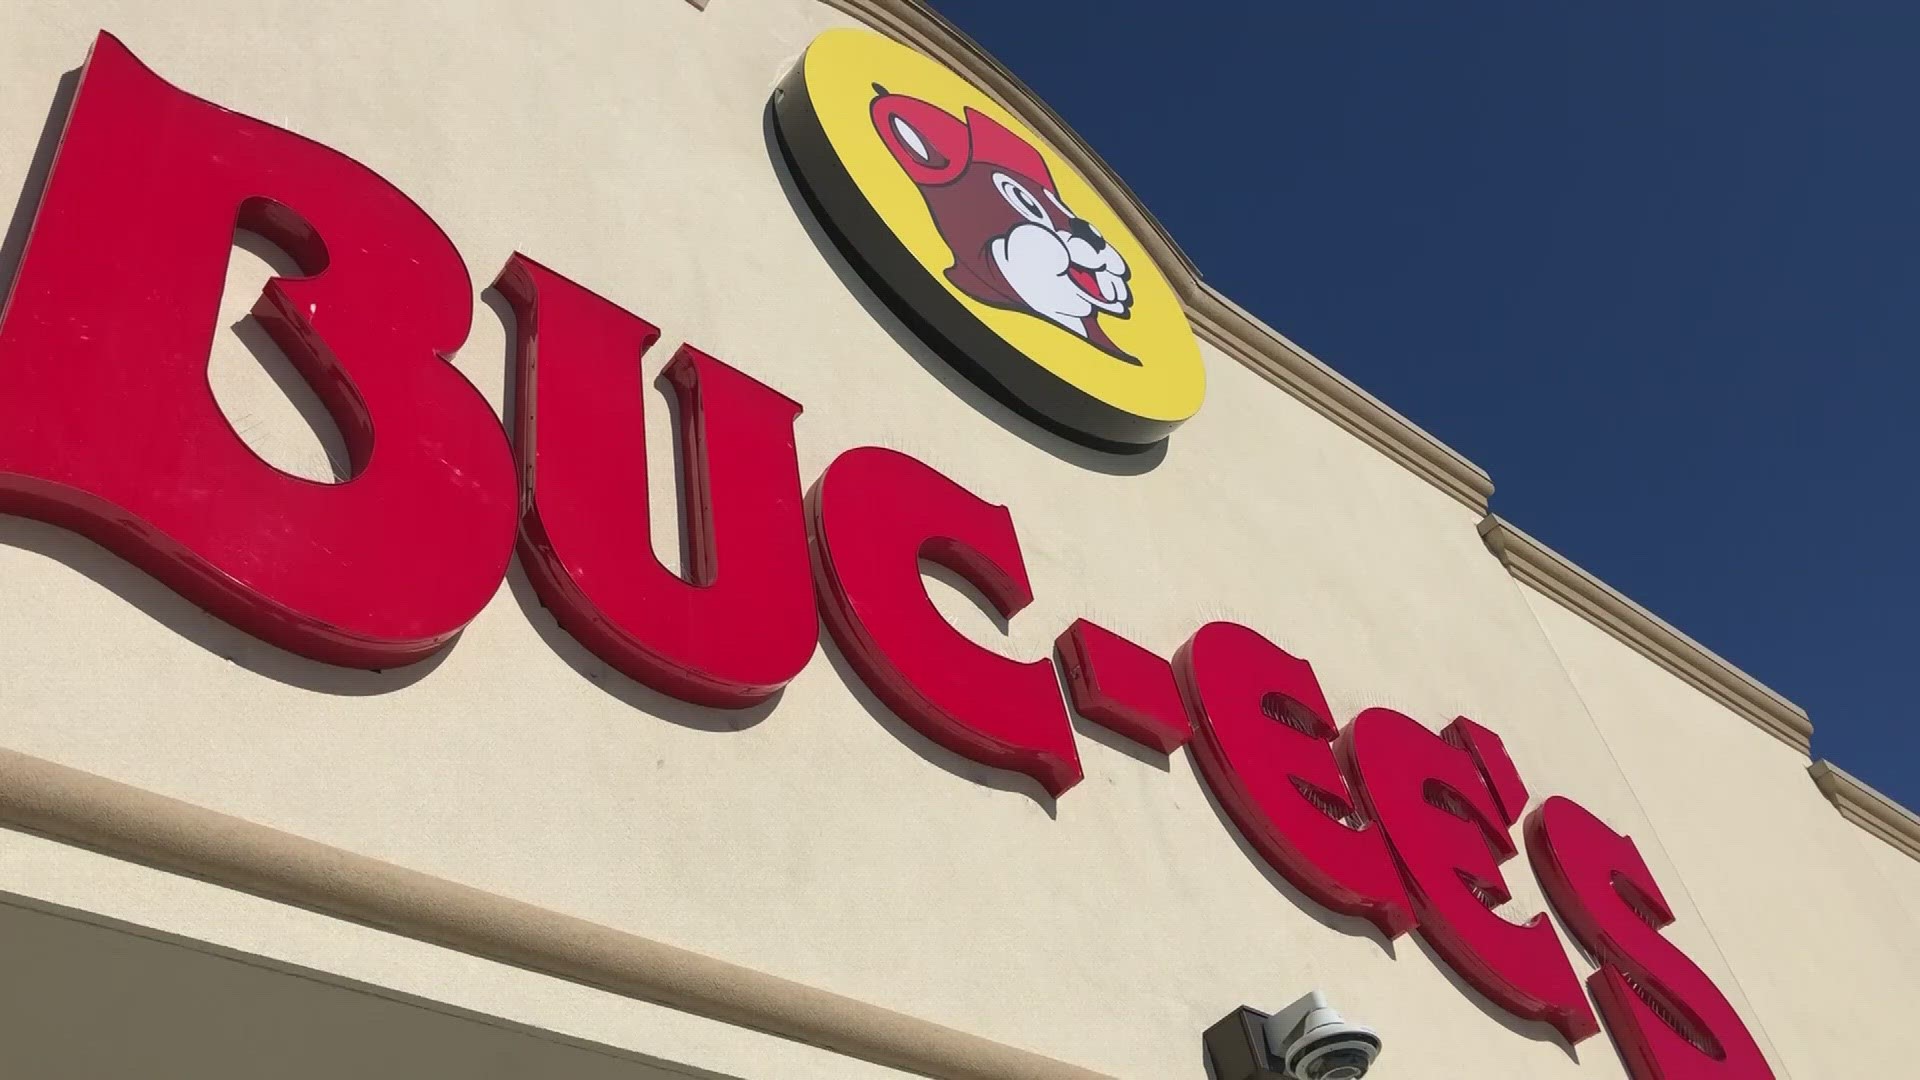 At 74,000 square feet with 120 fueling positions, it will be Buc-ee’s biggest store in Georgia.